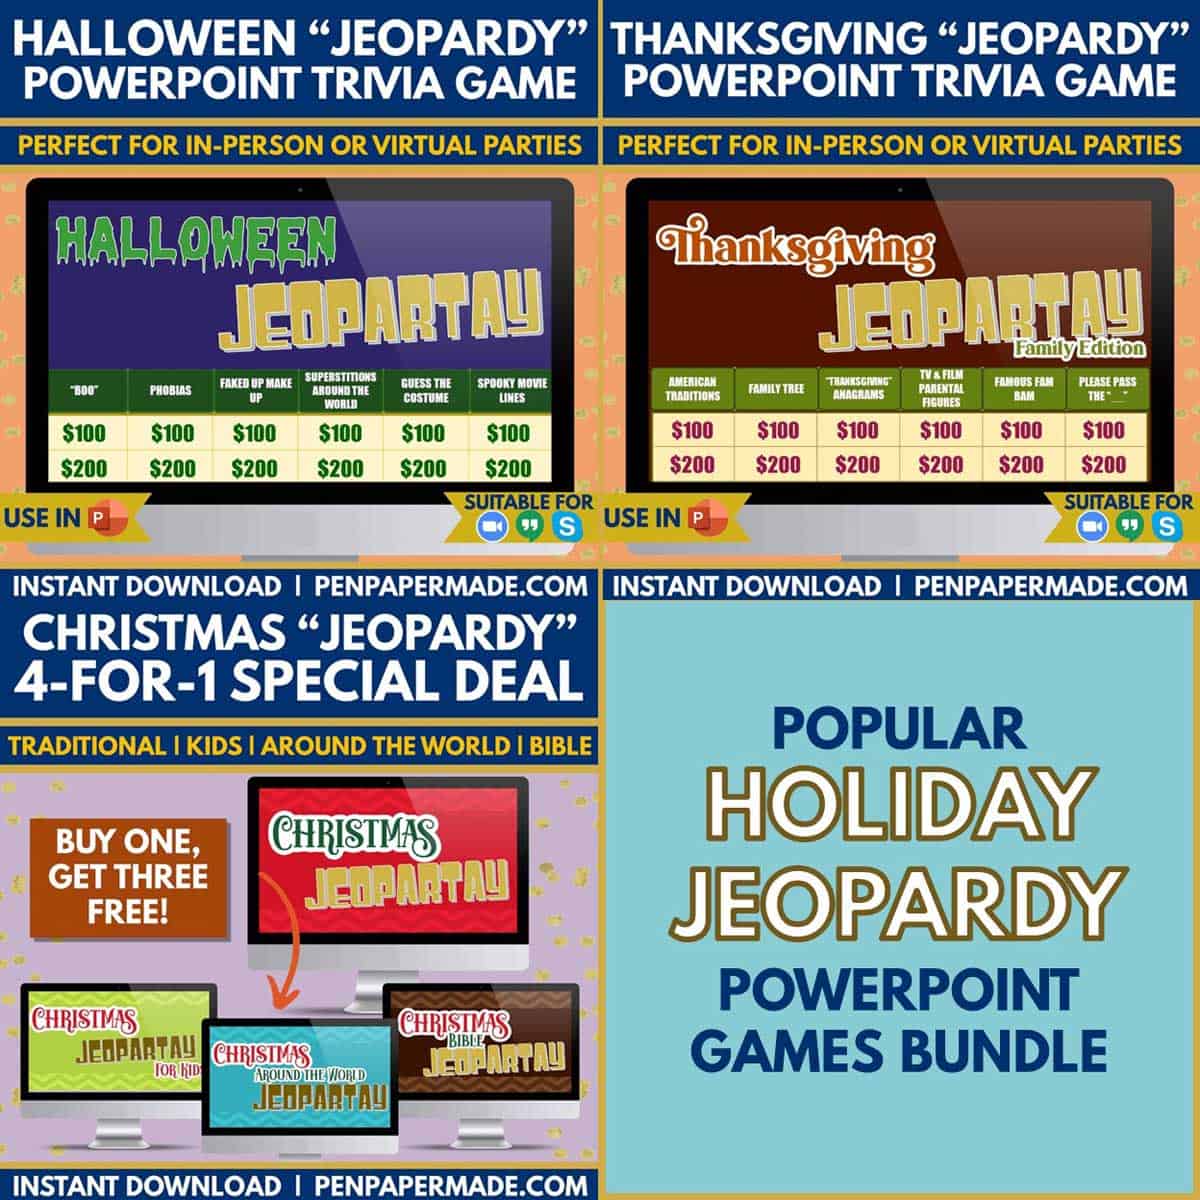 interactive holiday jeopardy game bundle in powerpoint for halloween, thanksgiving, christmas.